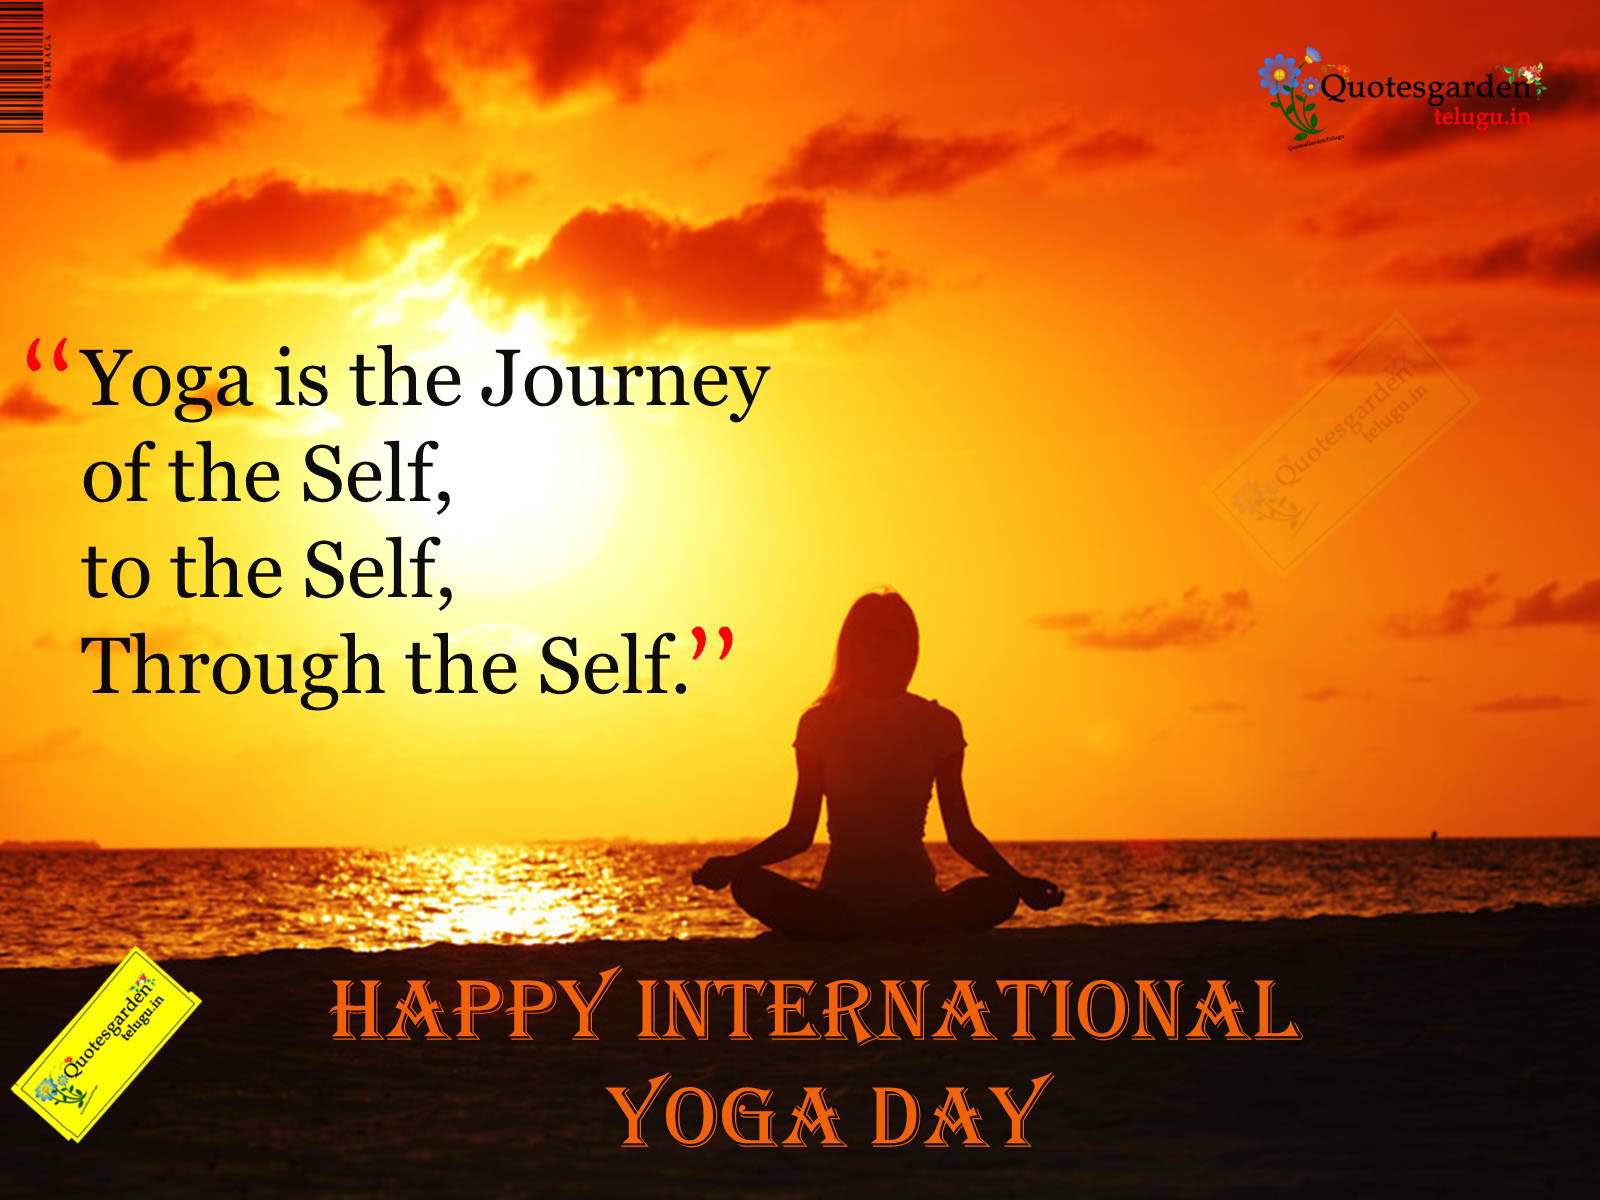 yoga is the journey of the self, to the self, through the self. happy international yoga day